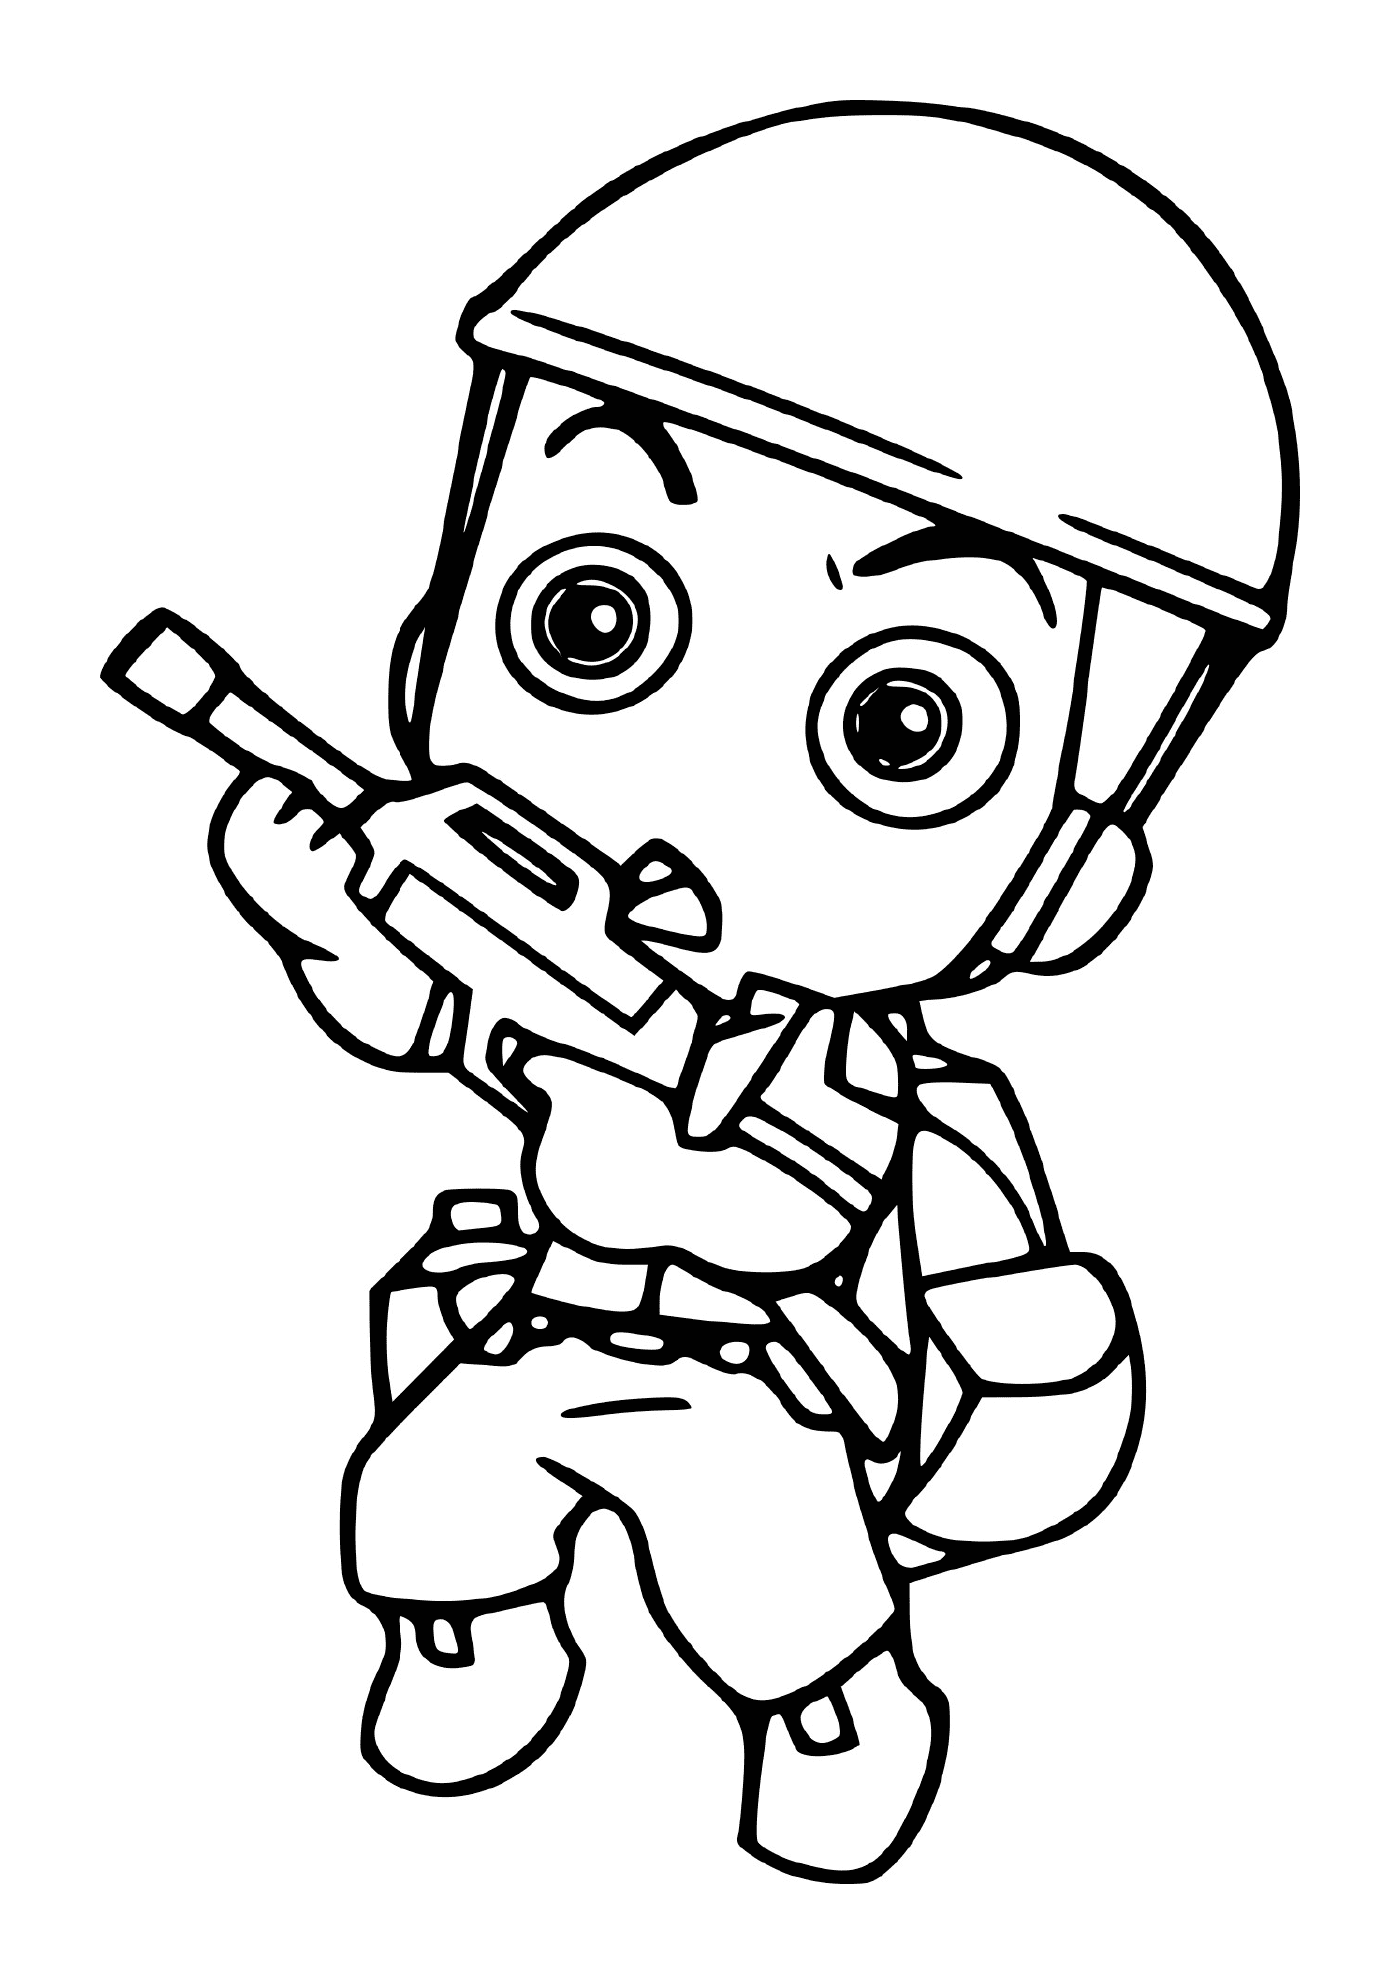  Mini military soldier with weapon: a man holding a screwdriver 